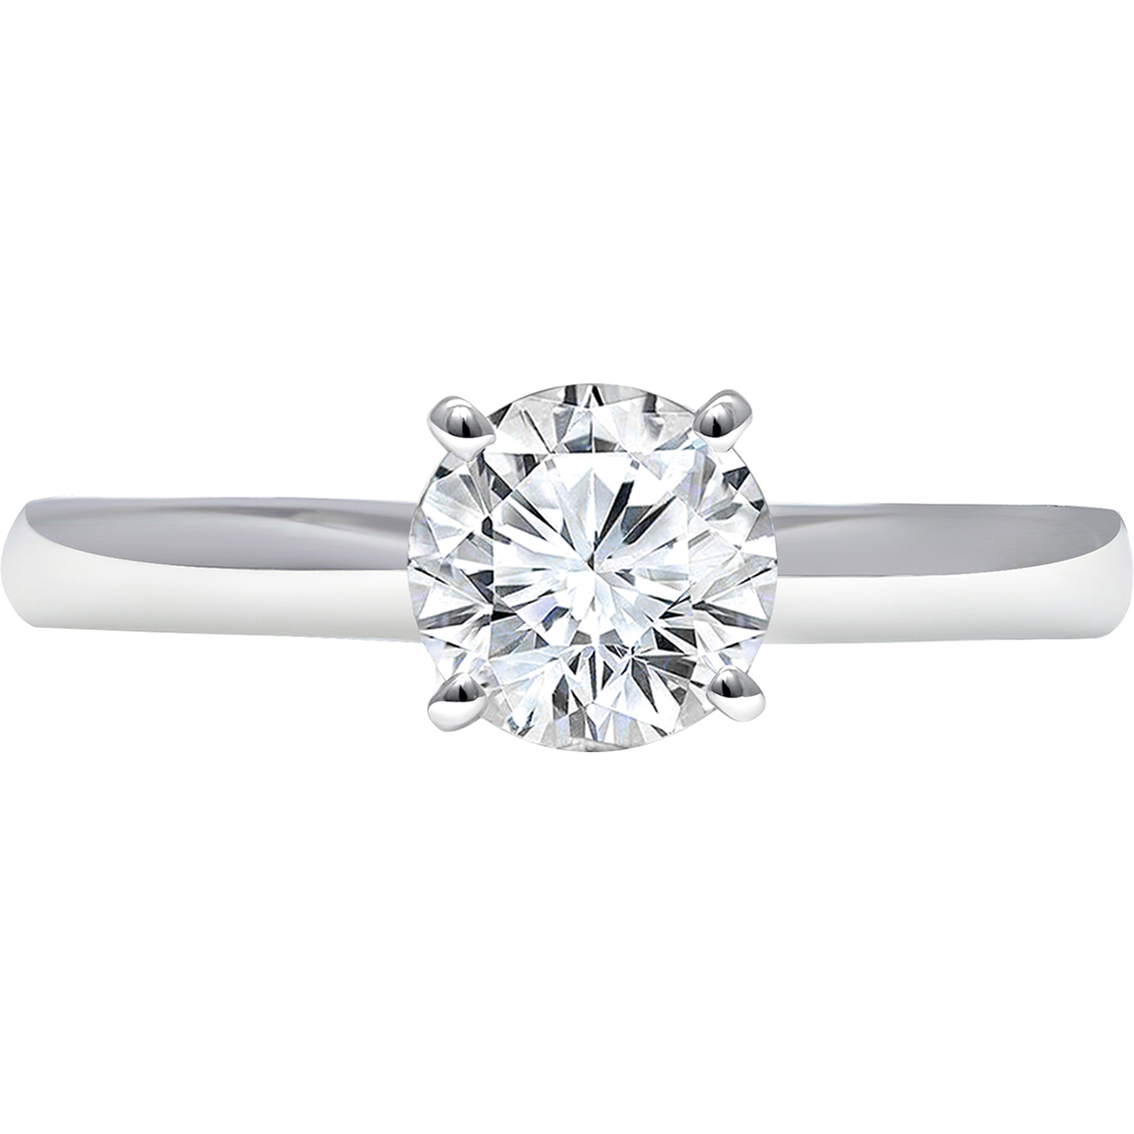 Ray of Brilliance 14K White Gold 1 1/2 ct. Lab Grown Diamond Solitaire Ring - Image 2 of 4